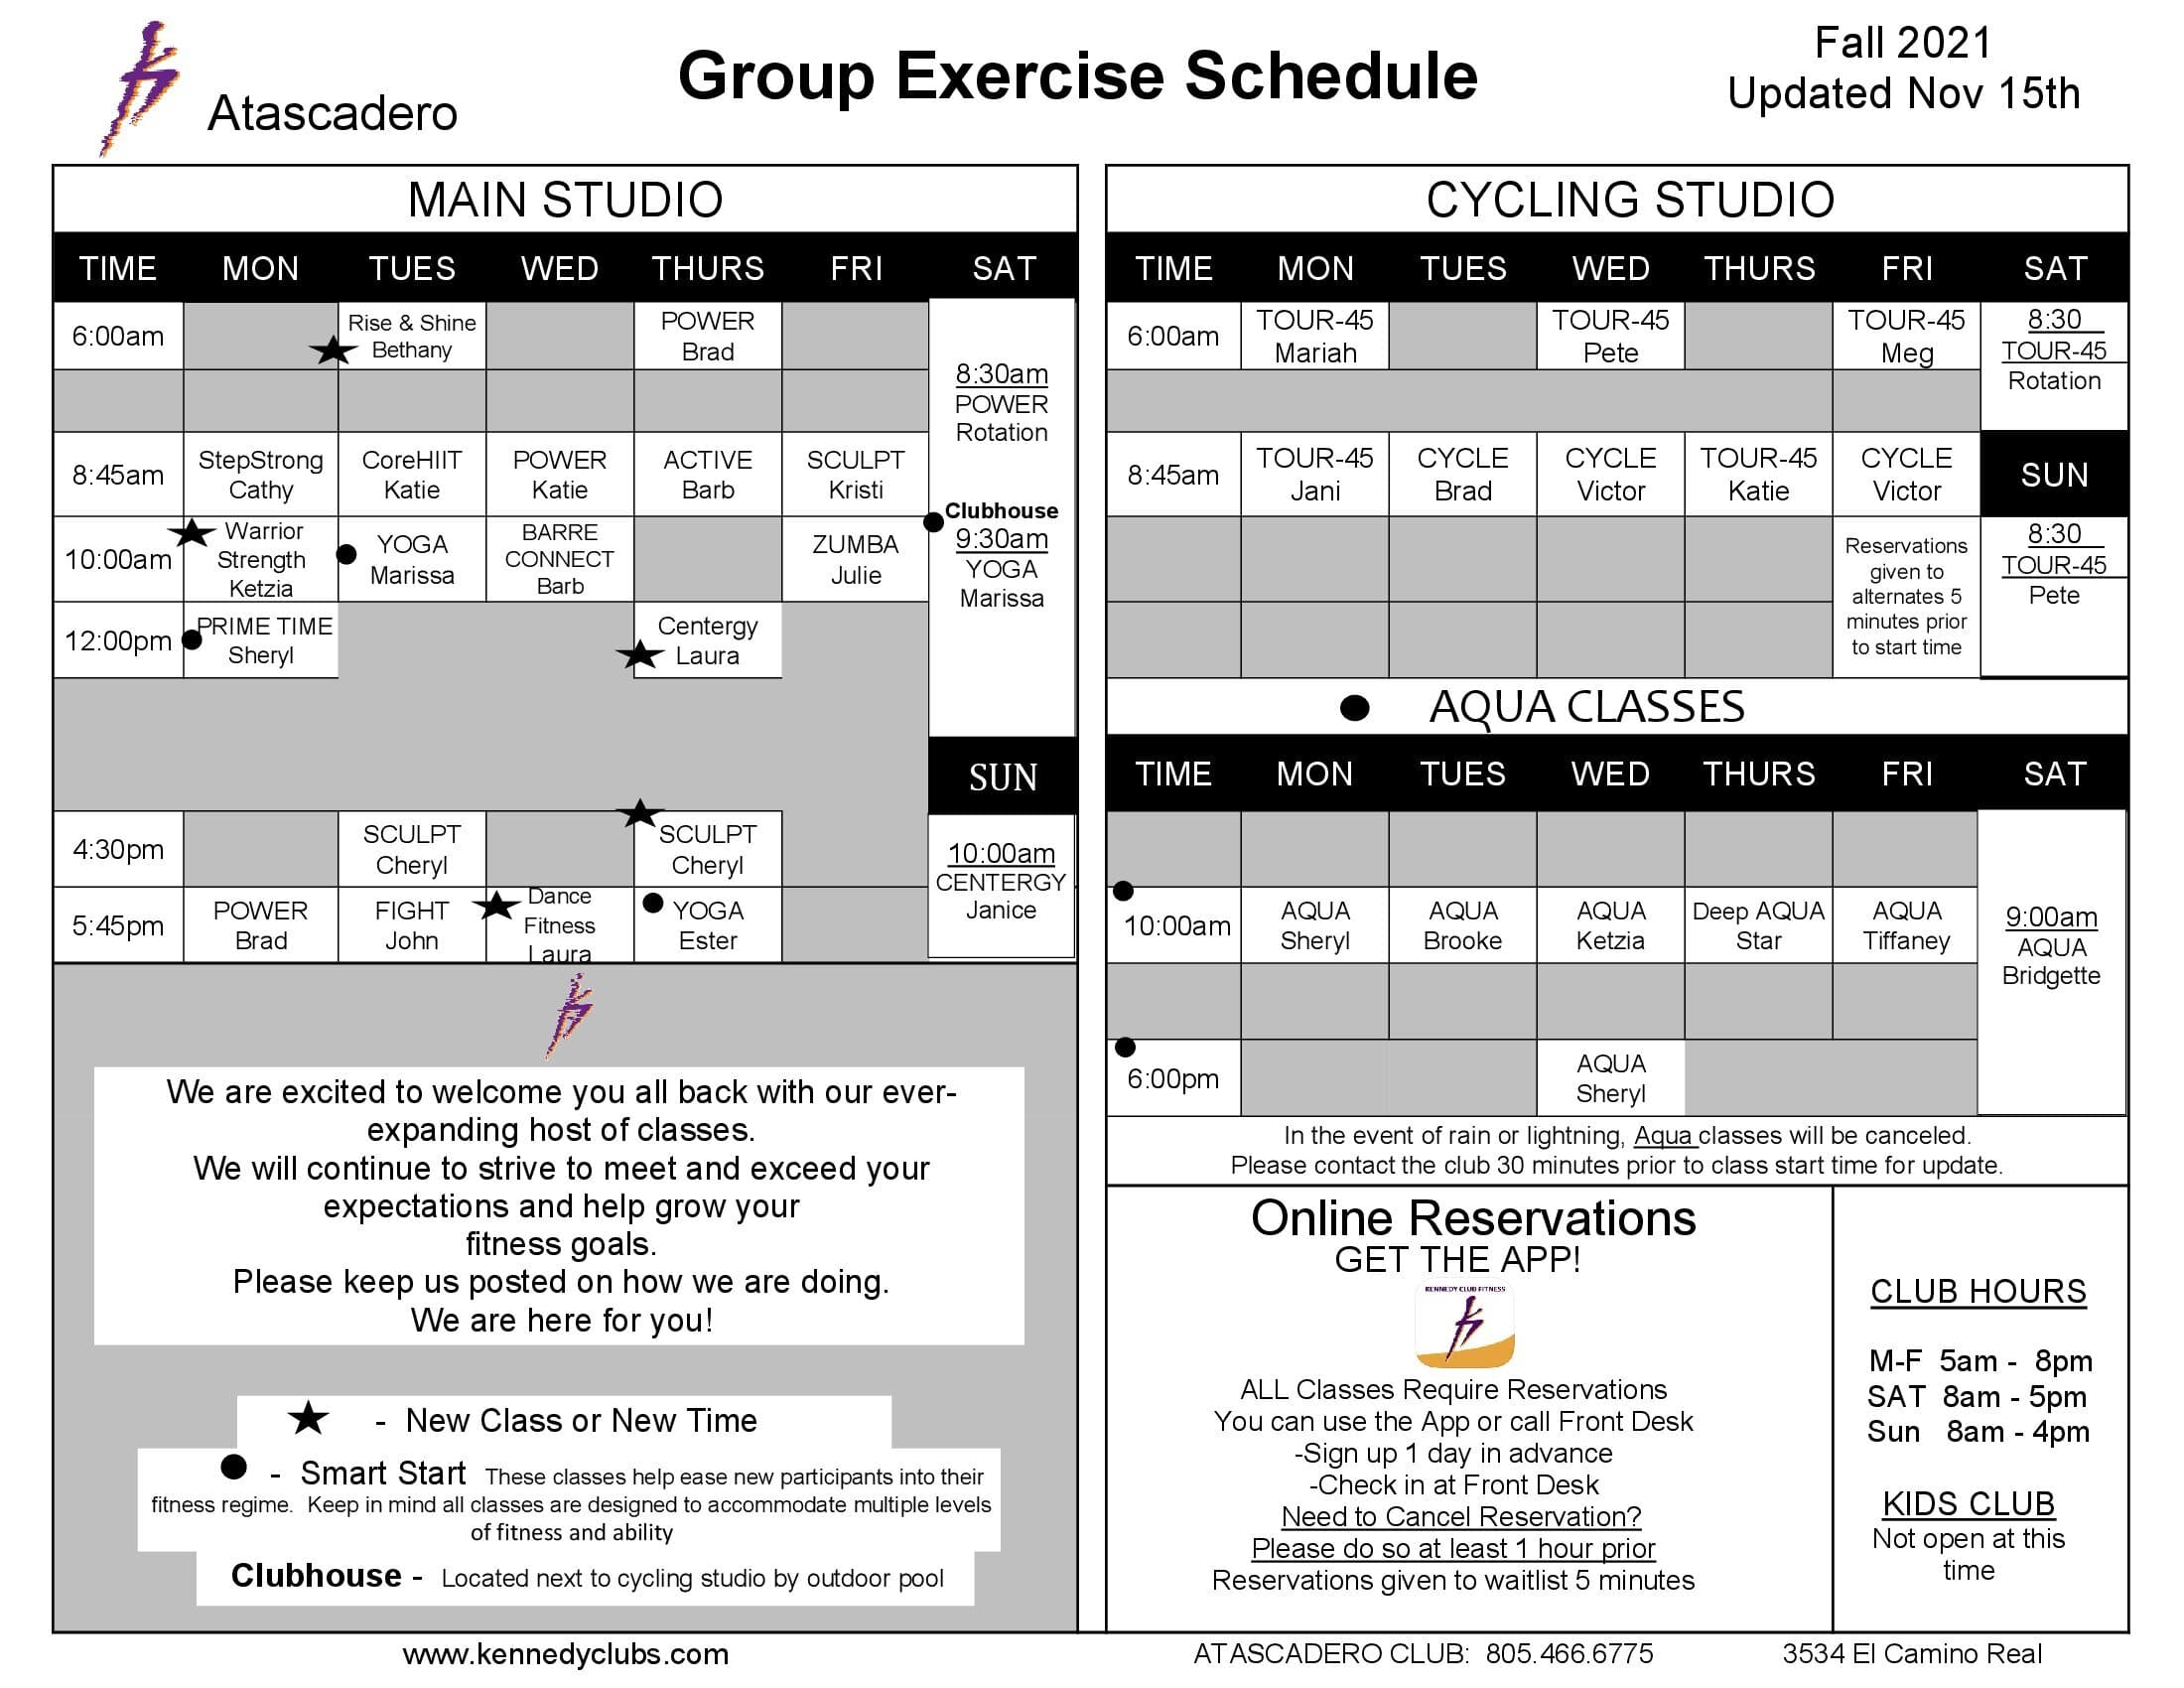 Kennedy Club Fitness Atascadero Group Exercise Schedule 11 09 2021